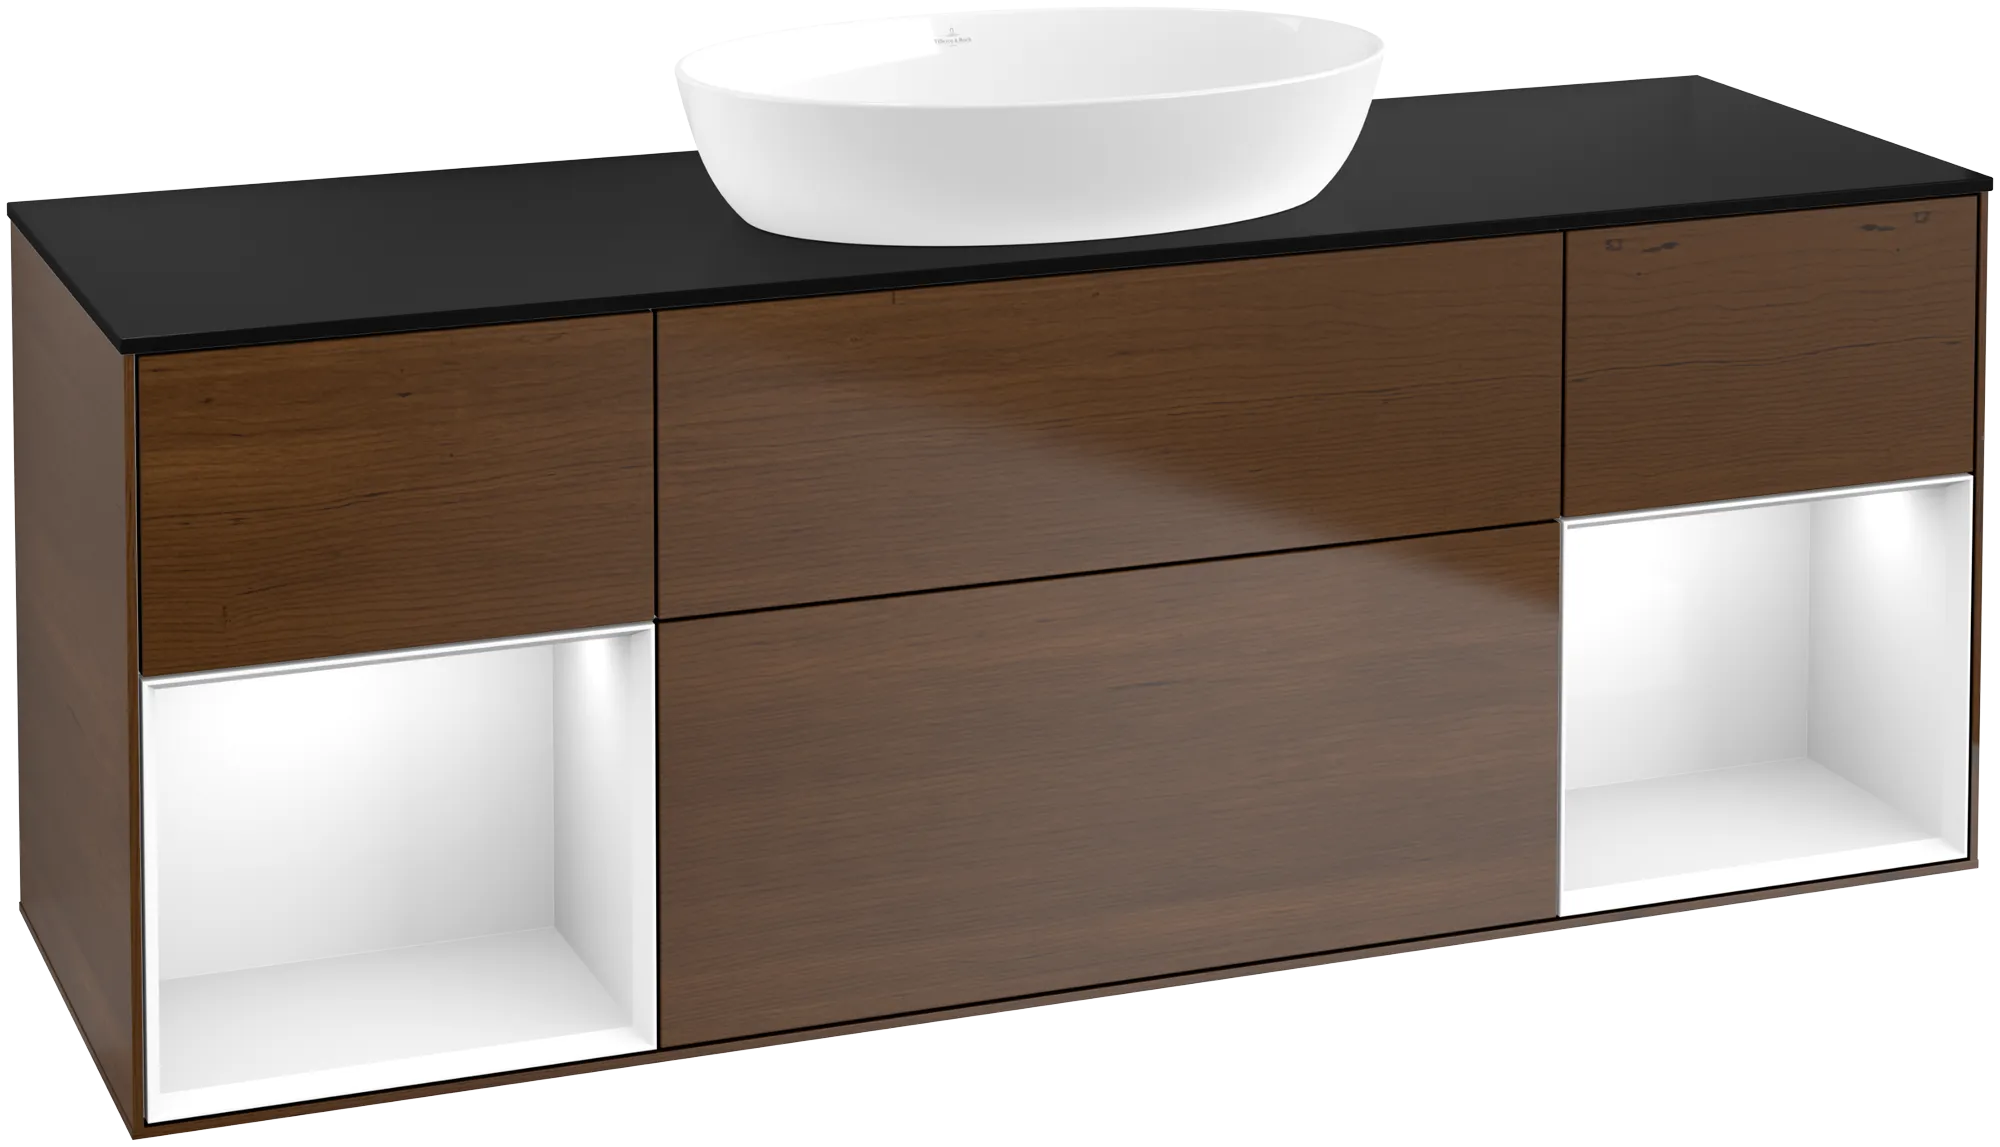 Picture of VILLEROY BOCH Finion Vanity unit, with lighting, 4 pull-out compartments, 1600 x 603 x 501 mm, Walnut Veneer / Glossy White Lacquer / Glass Black Matt #GD02GFGN